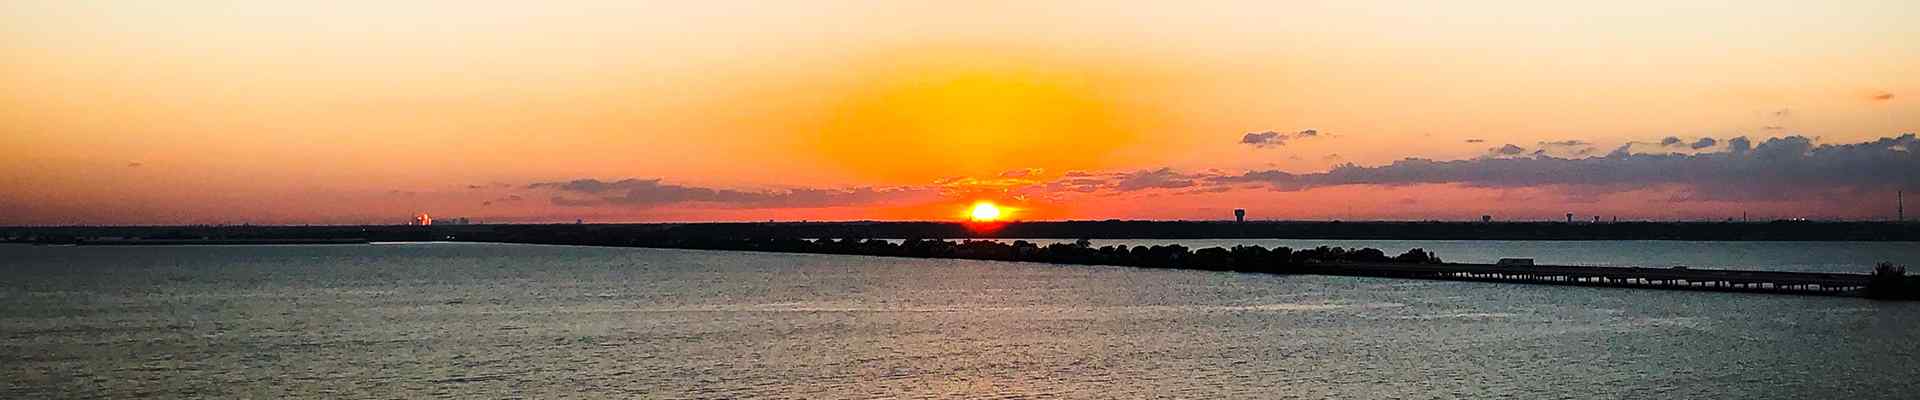 a sunset over the water in rockwall texas